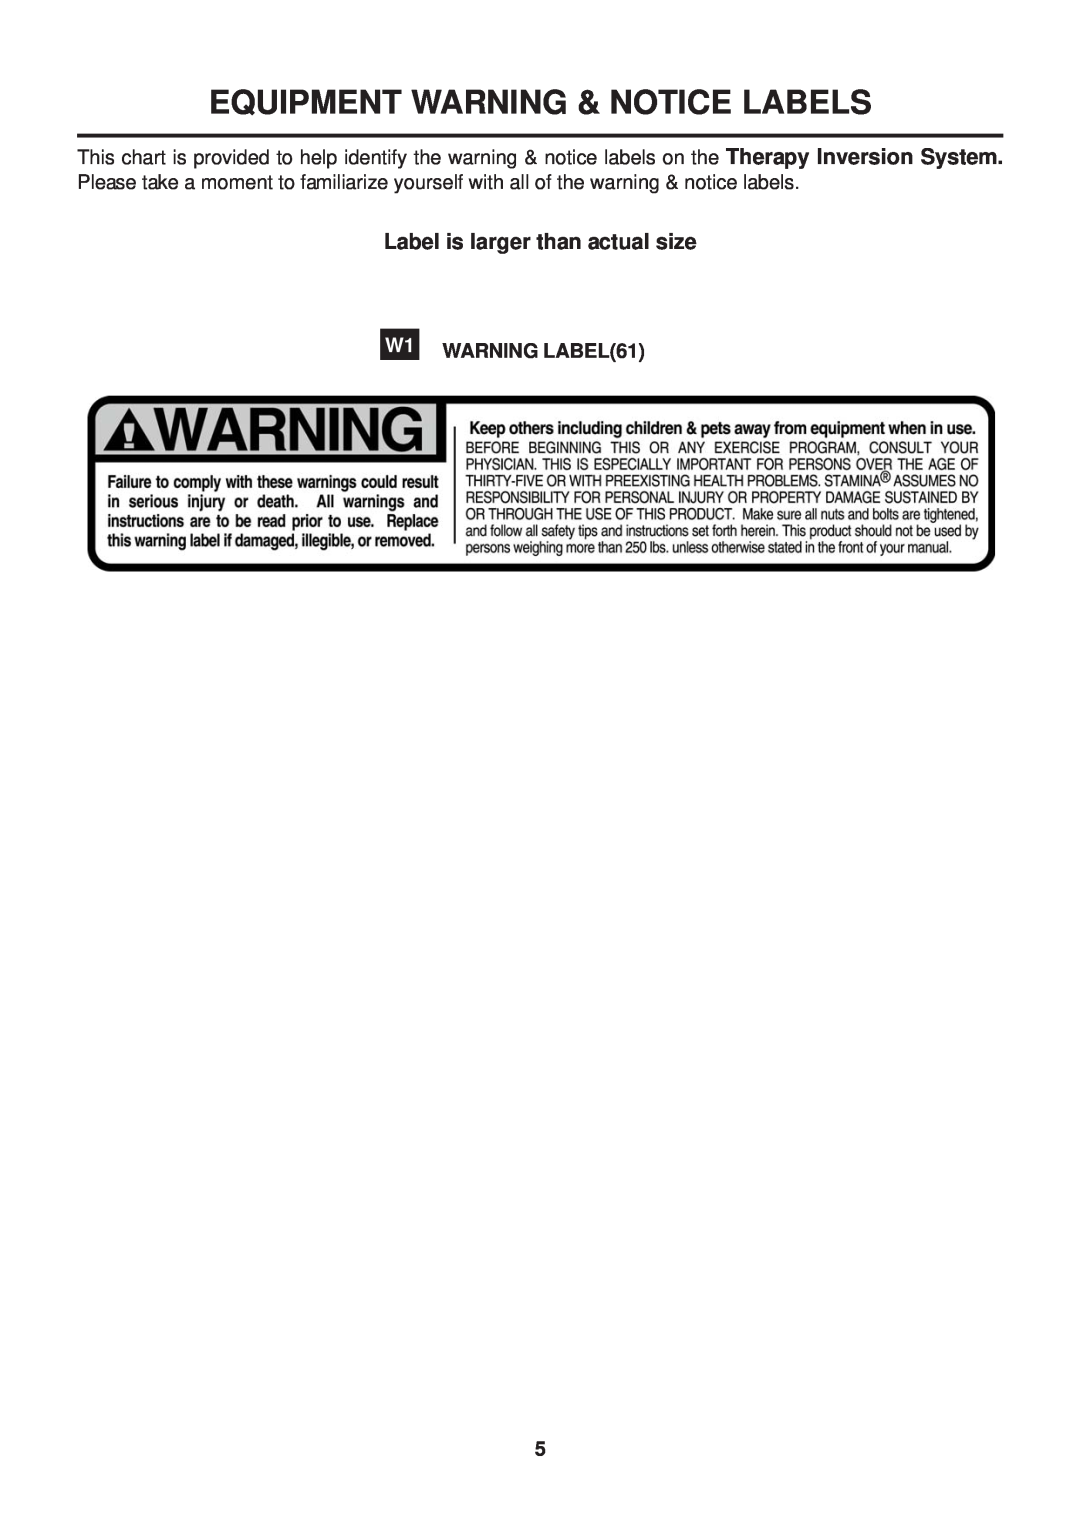 Stamina Products 55-1539A owner manual Equipment Warning & Notice Labels, Label is larger than actual size 